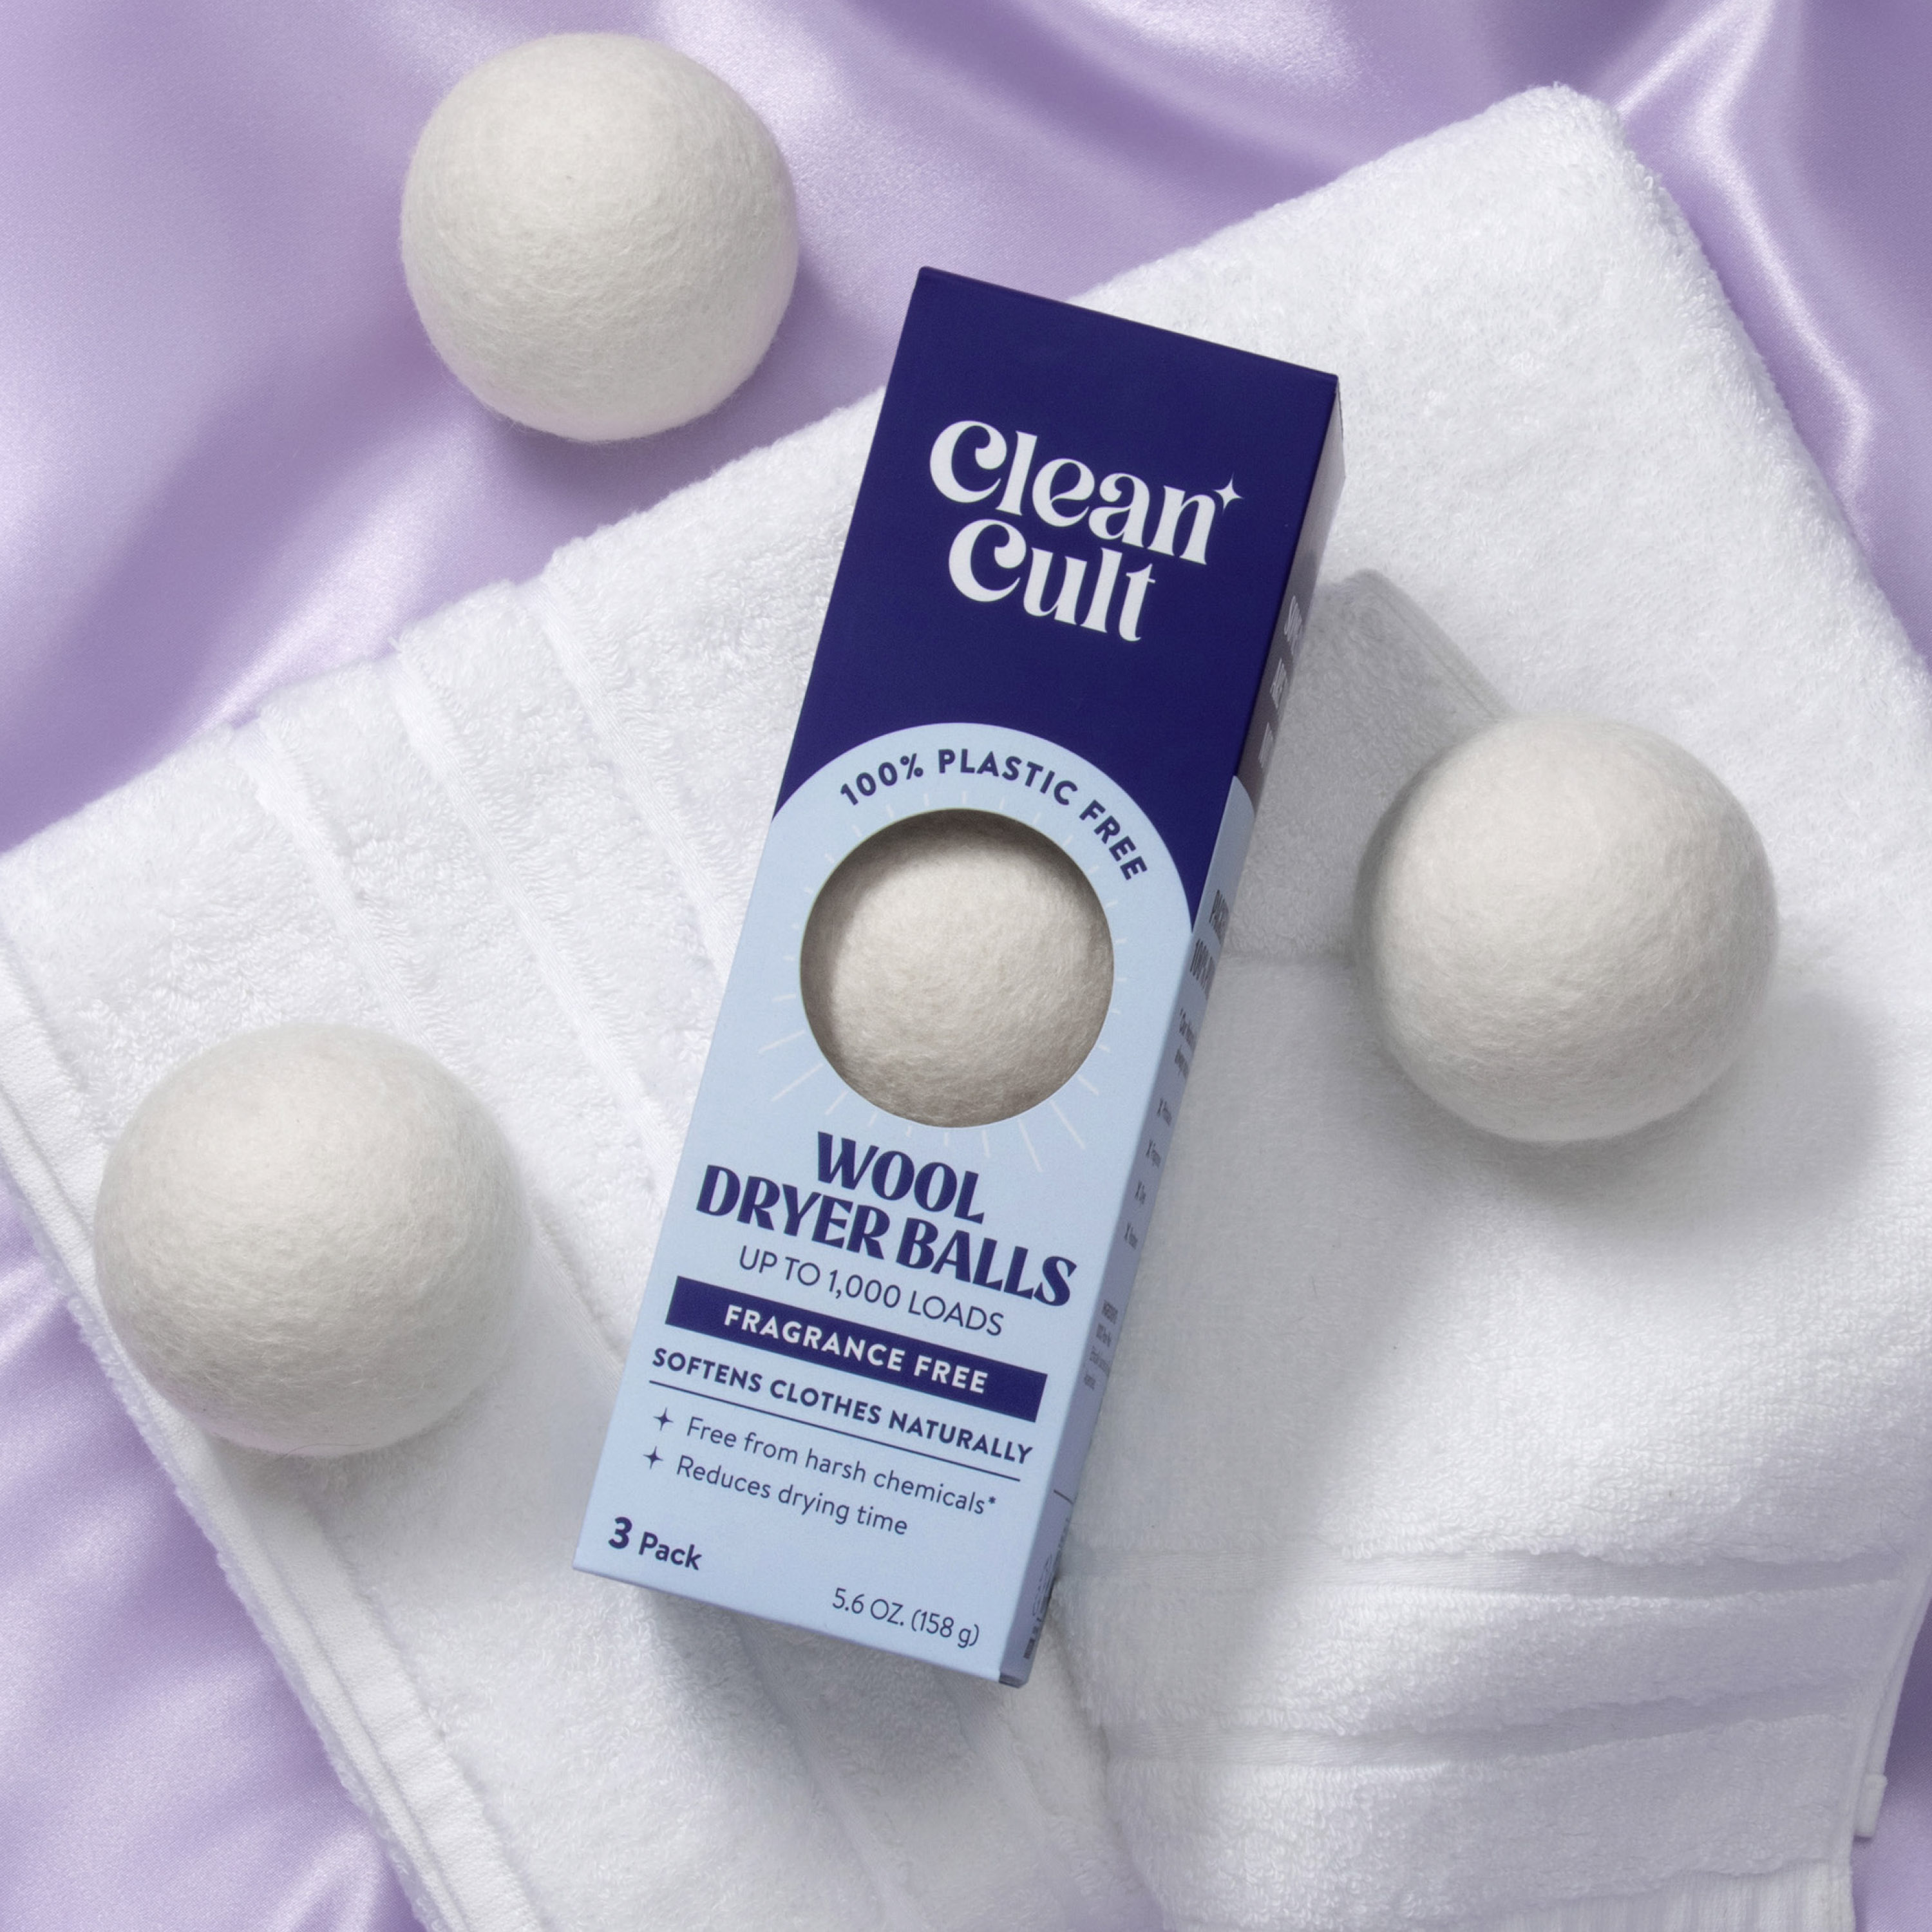 Cleancult Dryer Balls, Organic Wool, Reusable, Reduces Wrinkles, Unscented, 3 Count - image 6 of 7